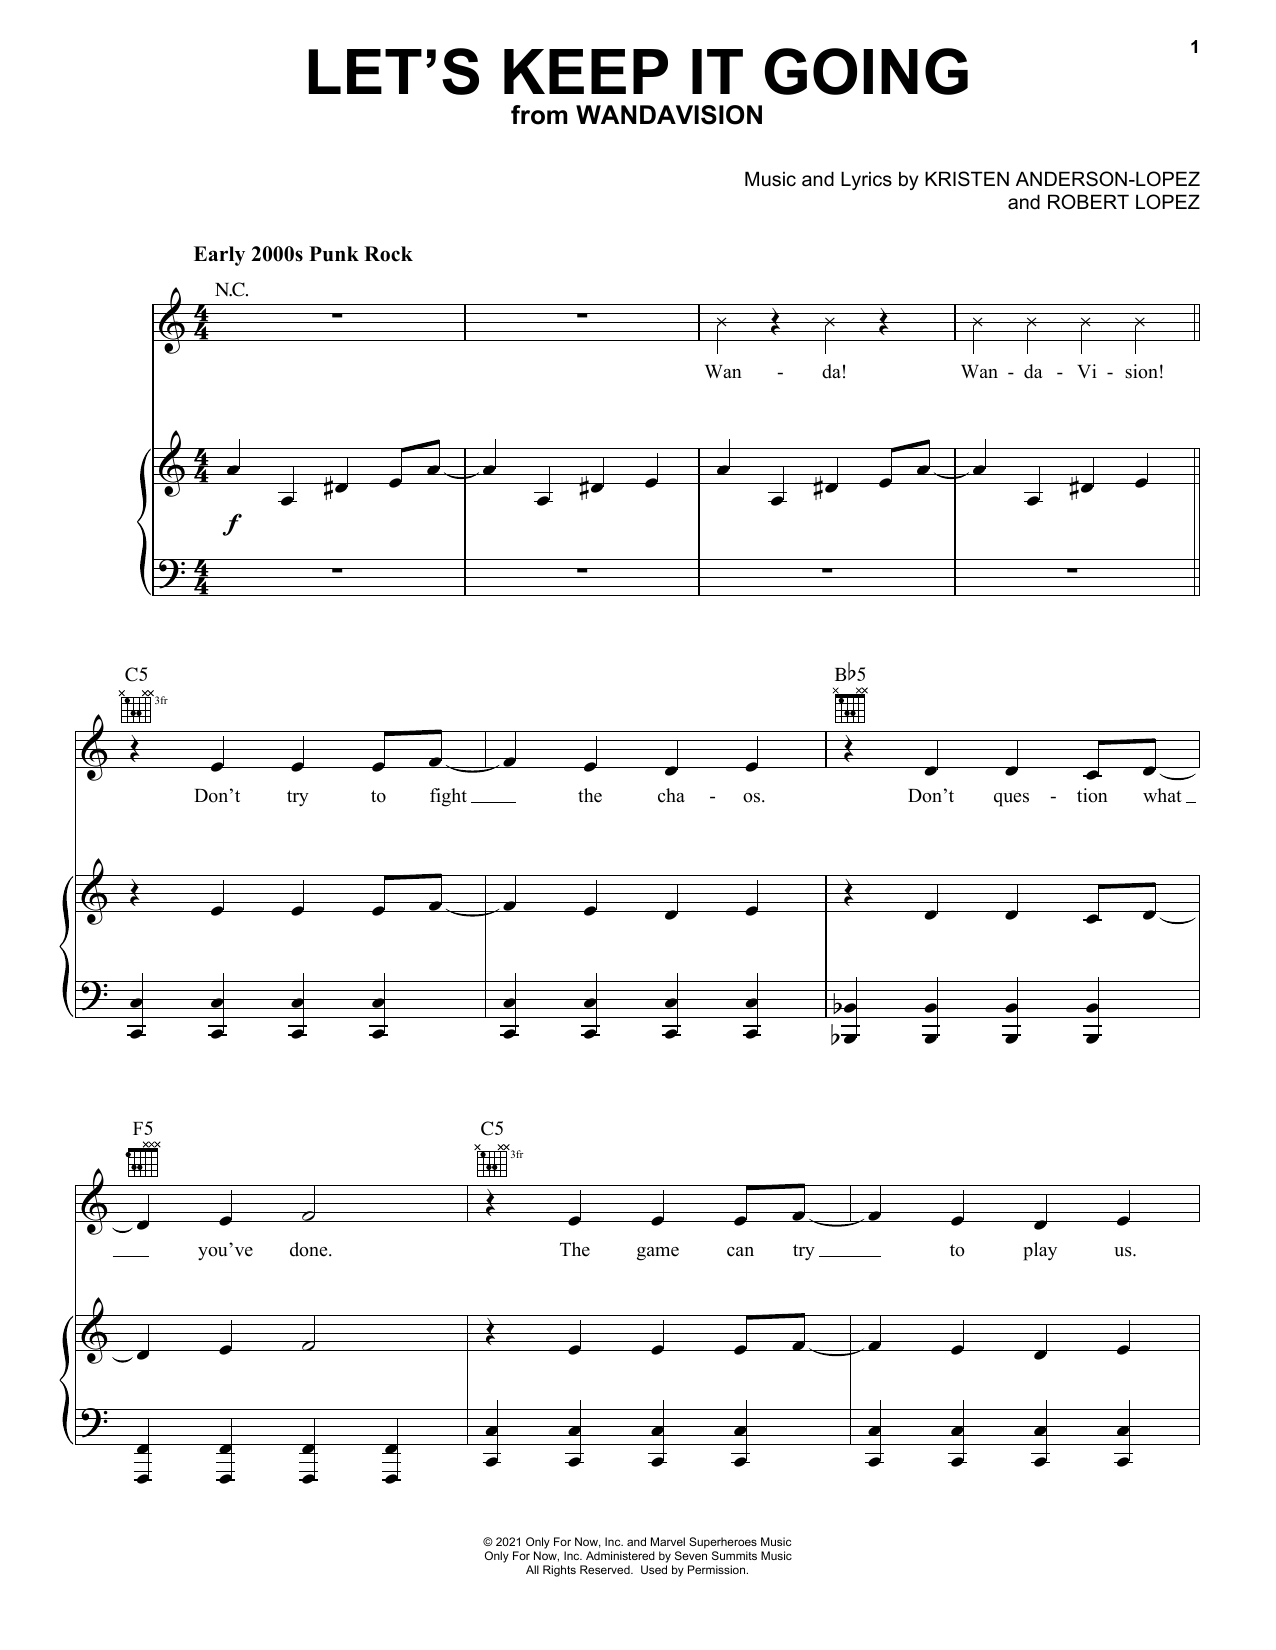 Download Kristen Anderson-Lopez & Robert Lope Let's Keep It Going (from WandaVision) Sheet Music